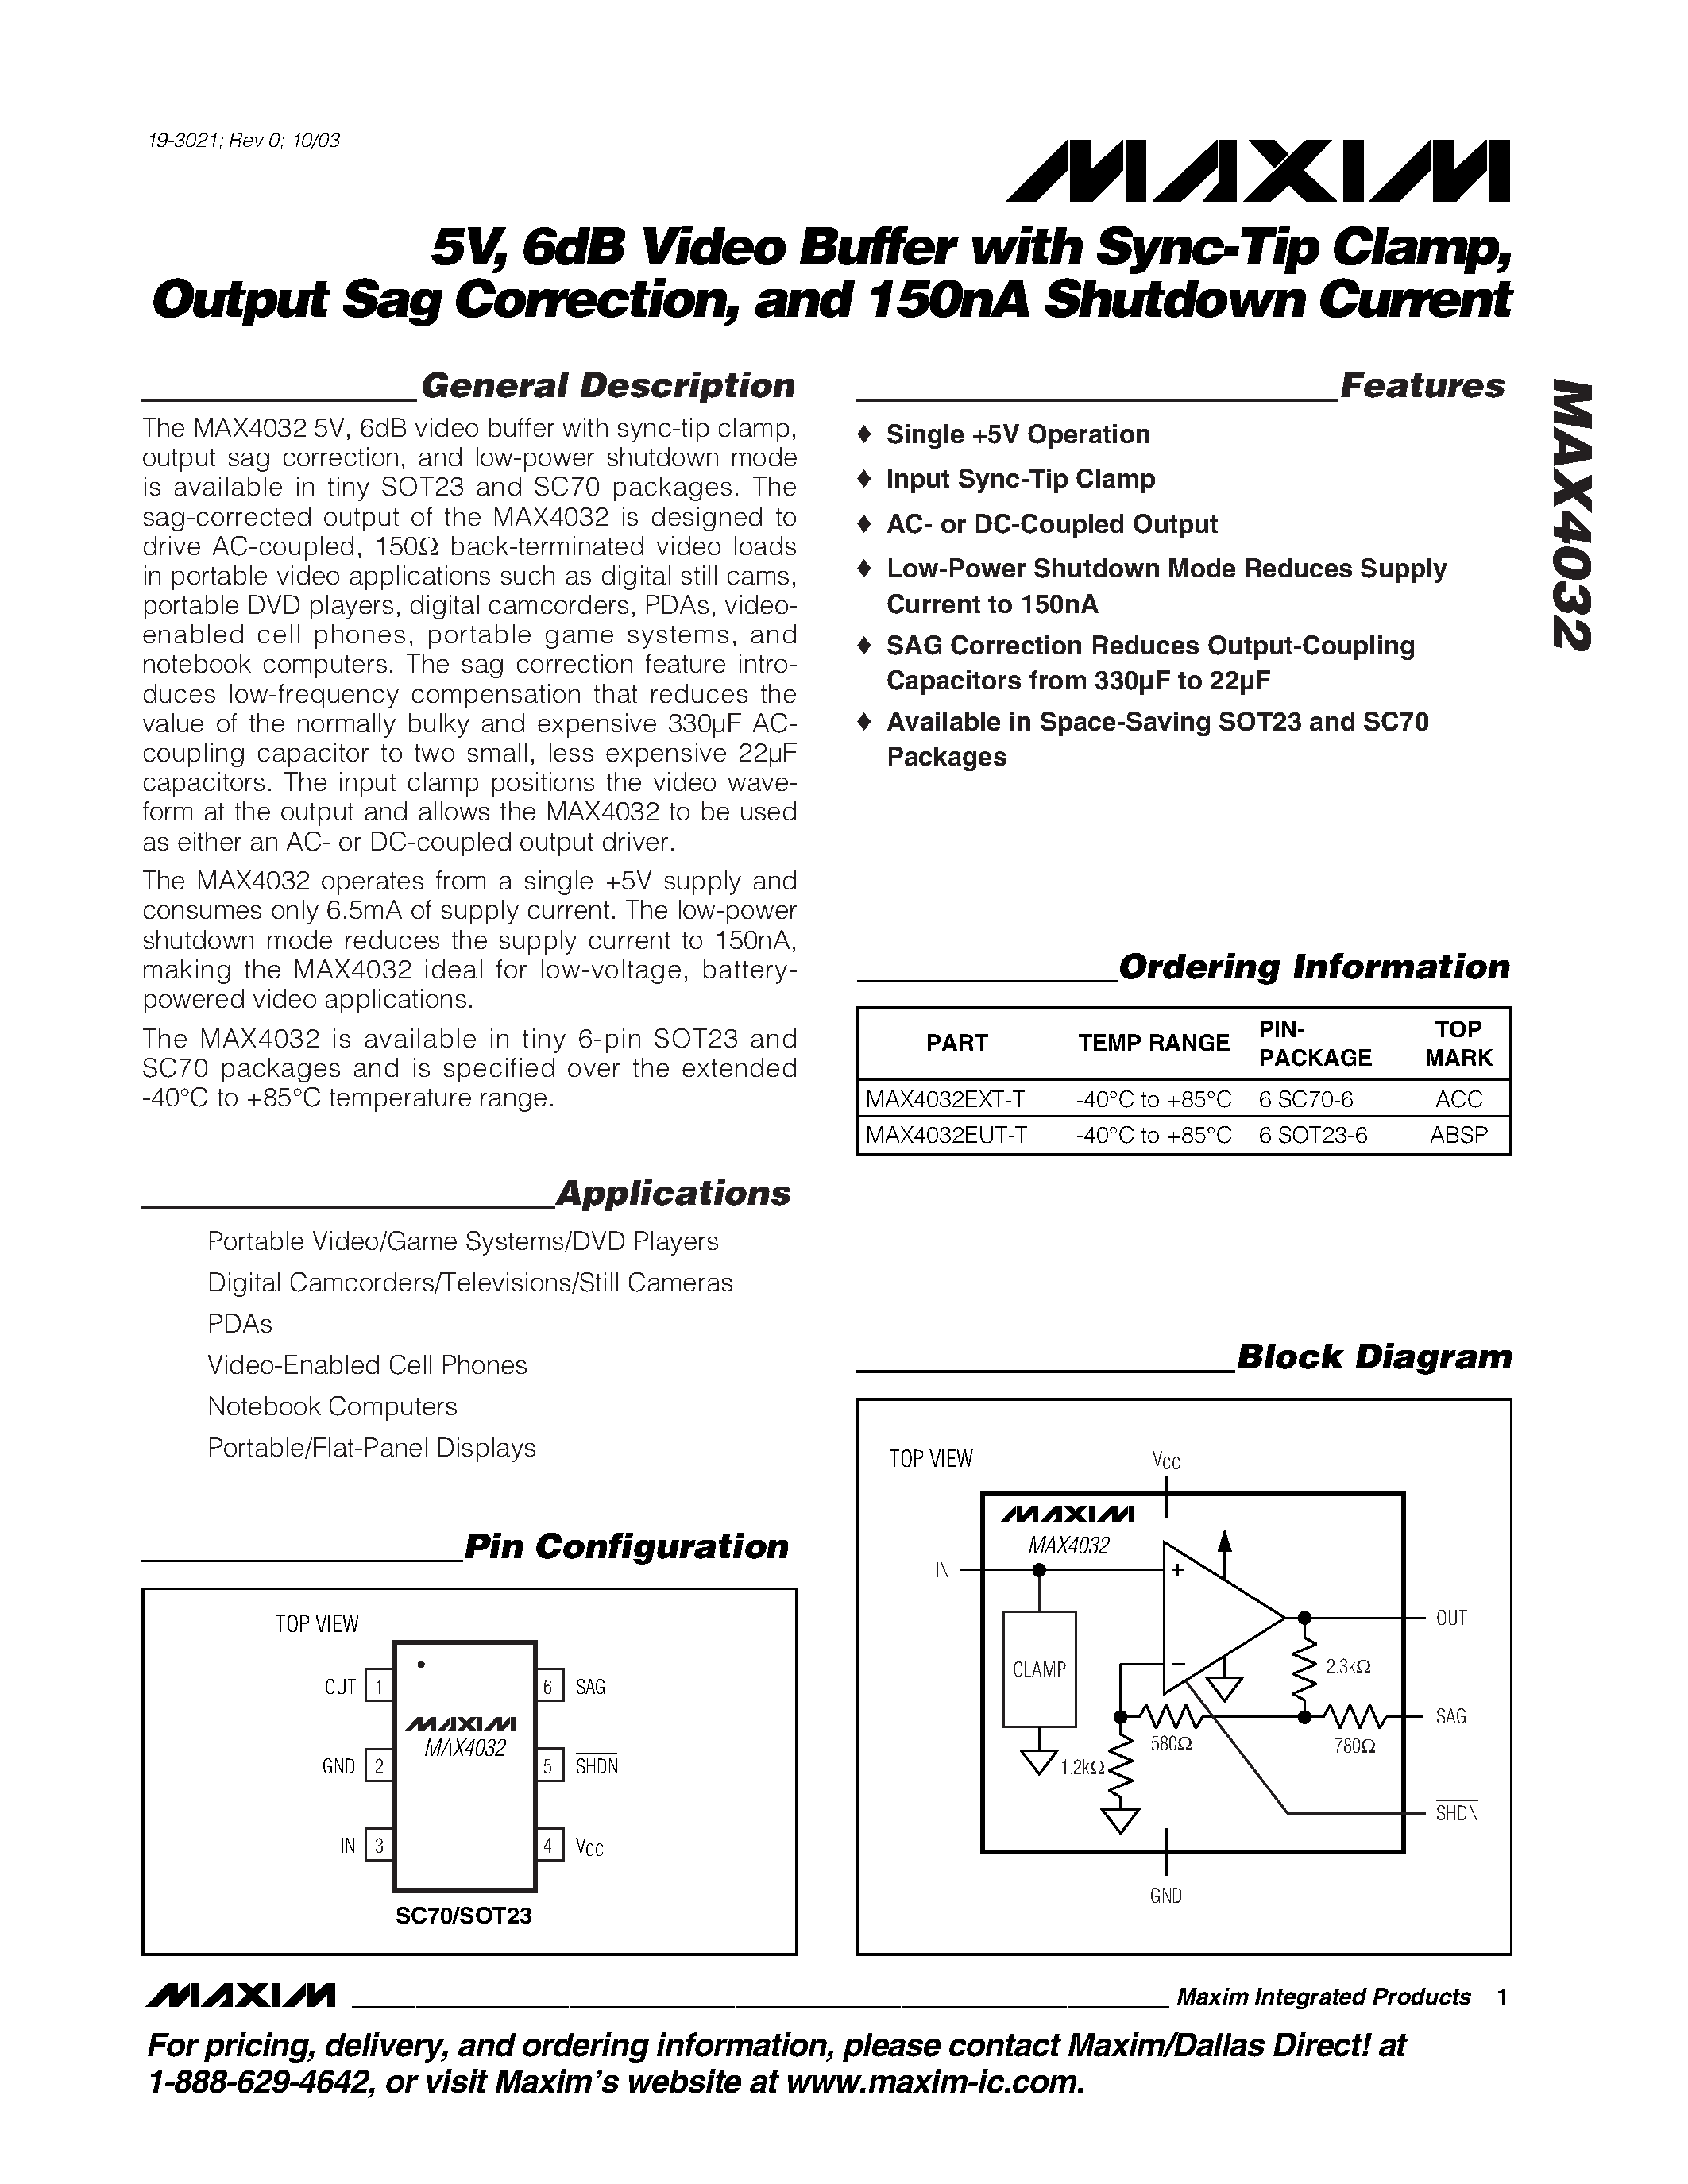 Datasheet MAX4032EUT-T - 5V / 6dB Video Buffer with Sync-Tip Clamp / Output Sag Correction / and 150nA Shutdown Current page 1